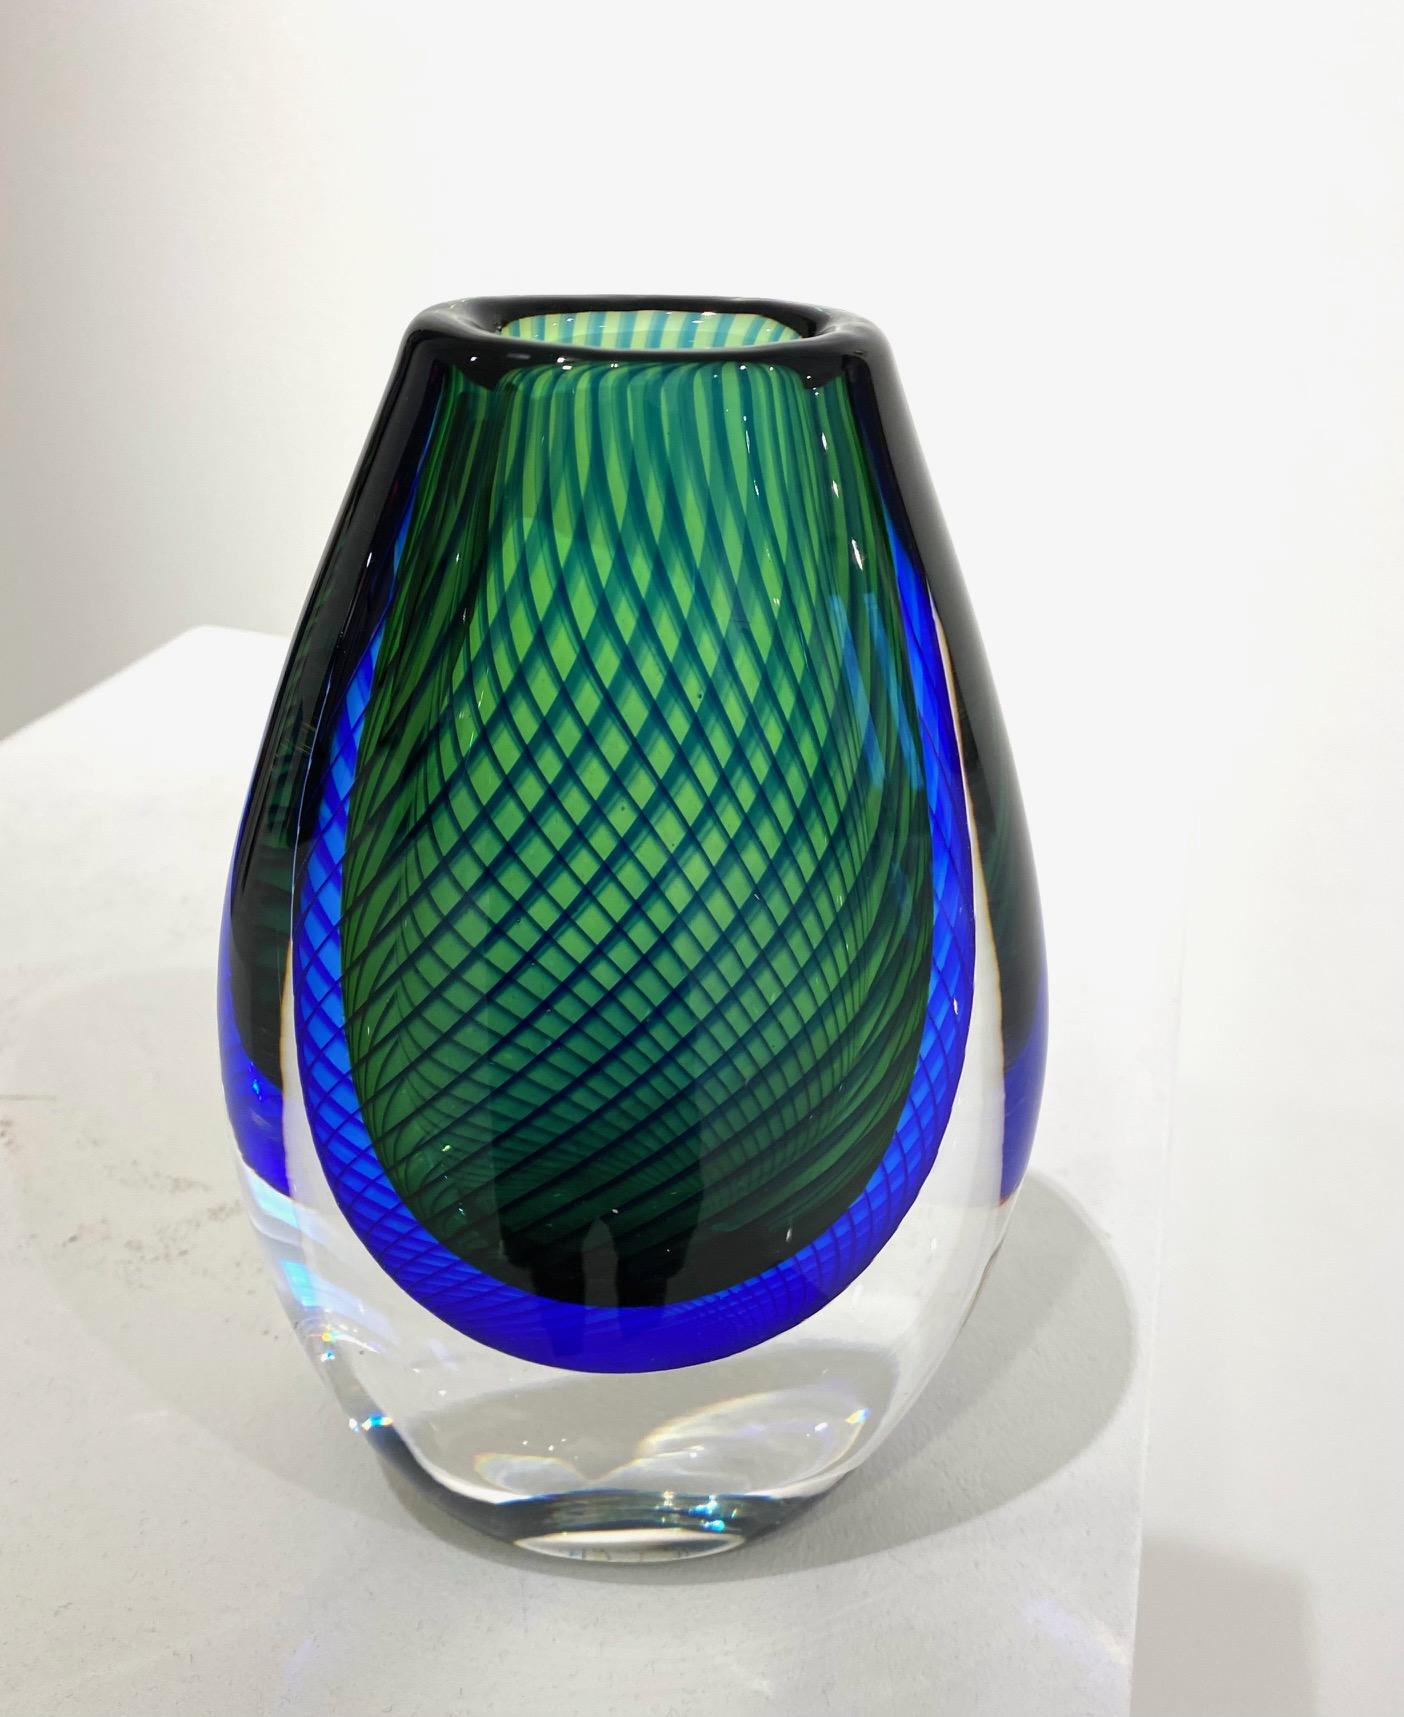 Mid-20th Century Blue and Green Glass Vase by Vicki Lindstrand for Kosta Boda. For Sale